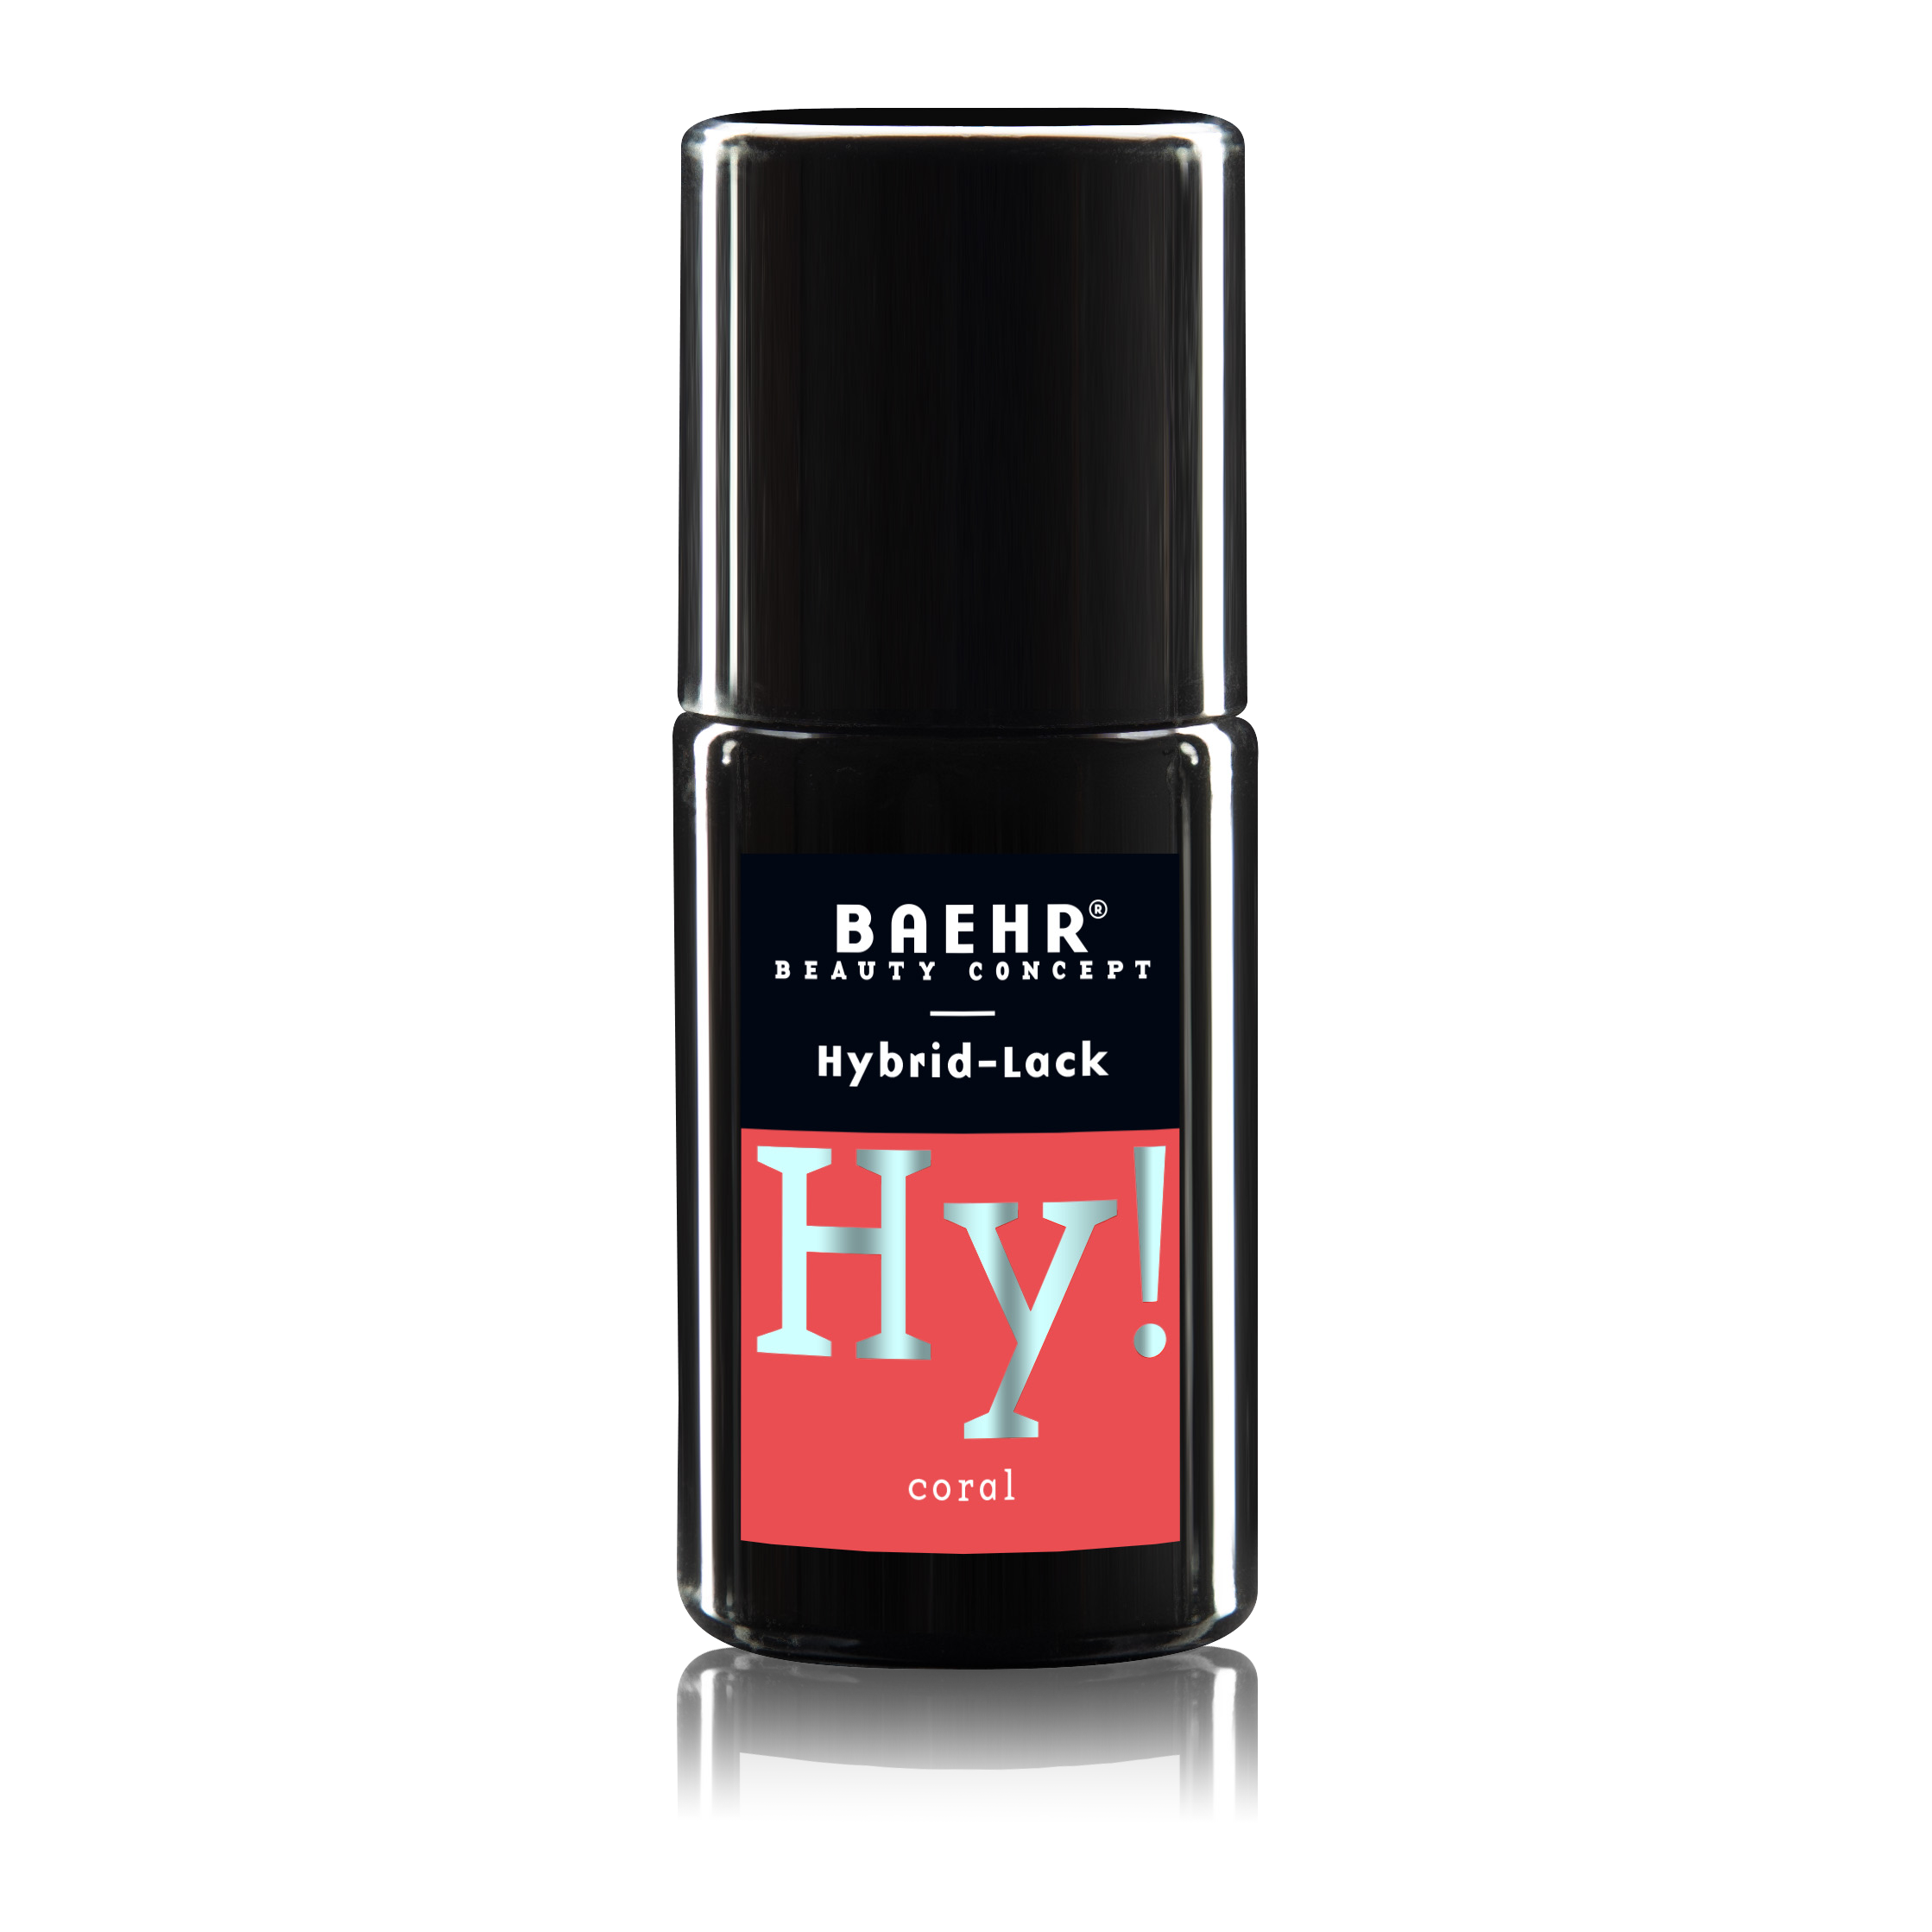 BAEHR BEAUTY CONCEPT - NAILS Hy! Hybrid-Lack, coral 8 ml